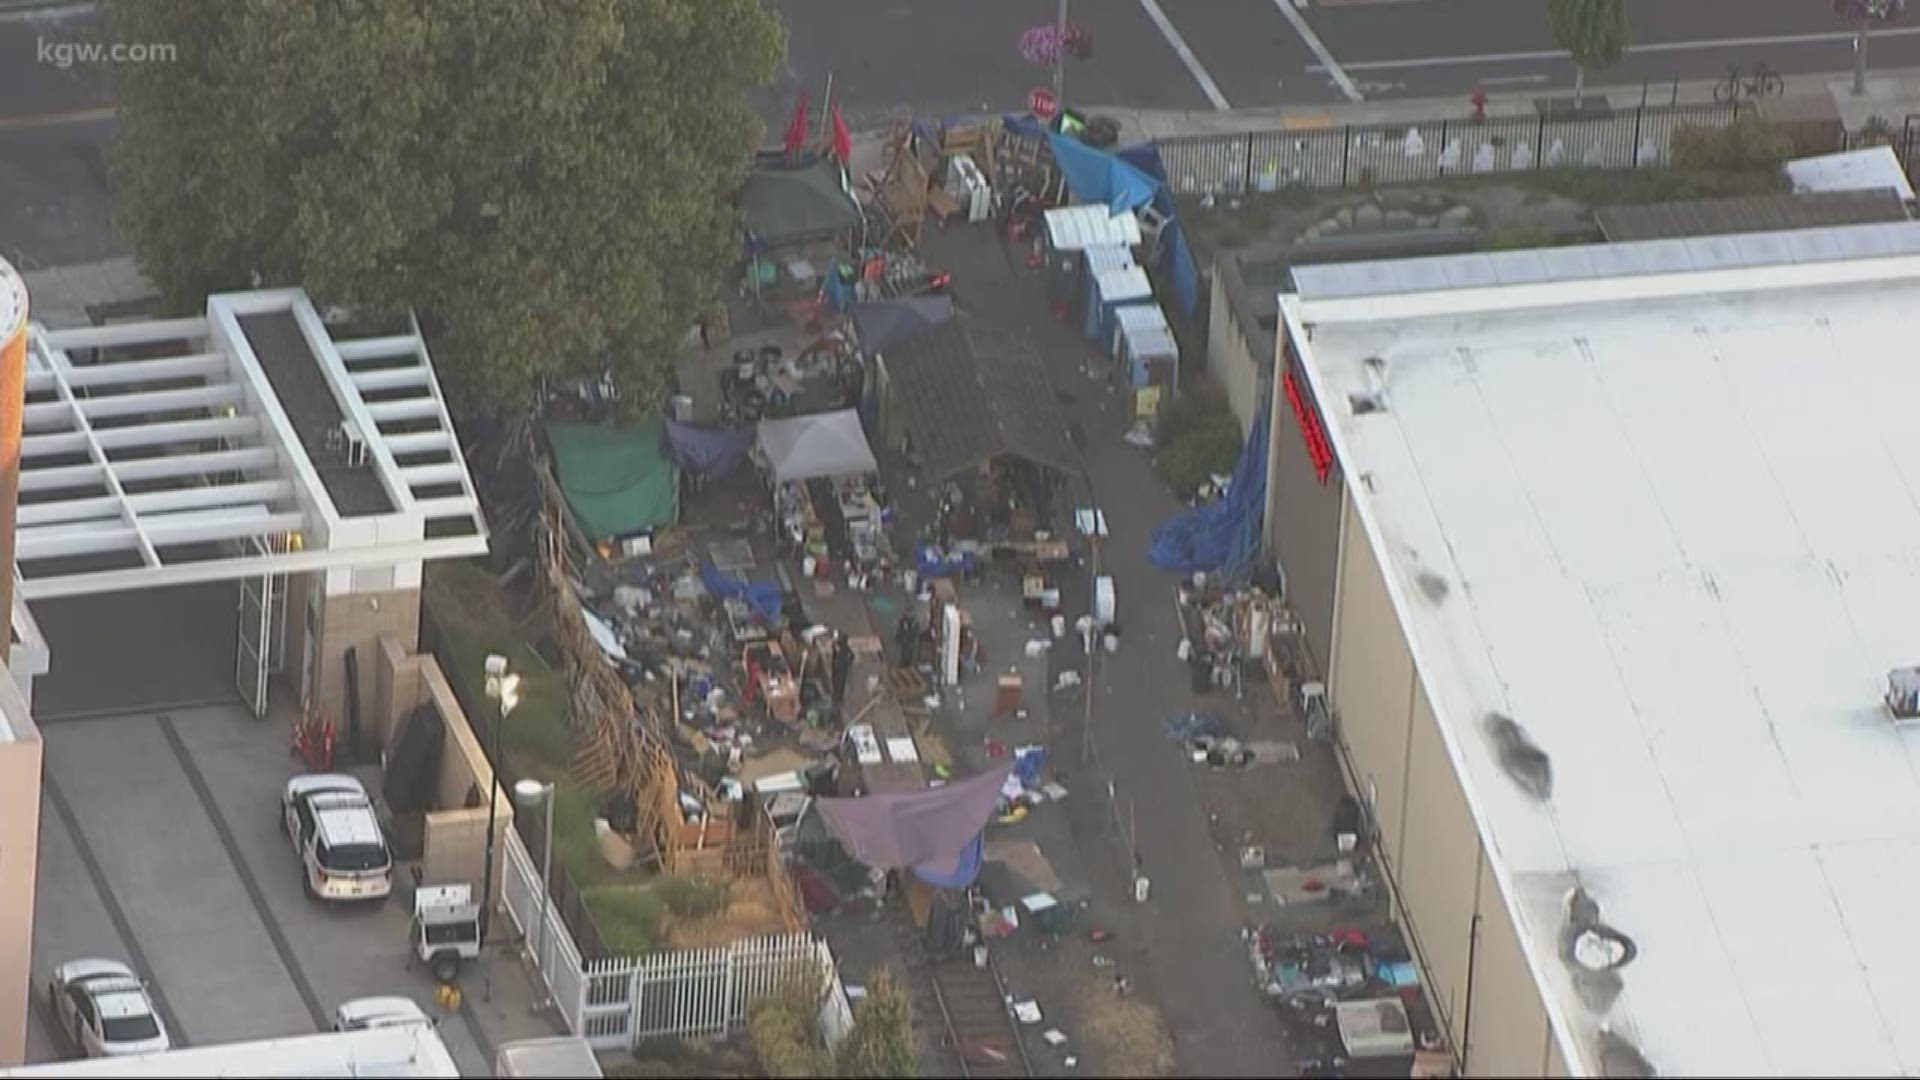 Portland police cleared out an occupation camp Wednesday morning outside the Portland ICE holding facility in Southwest Portland.